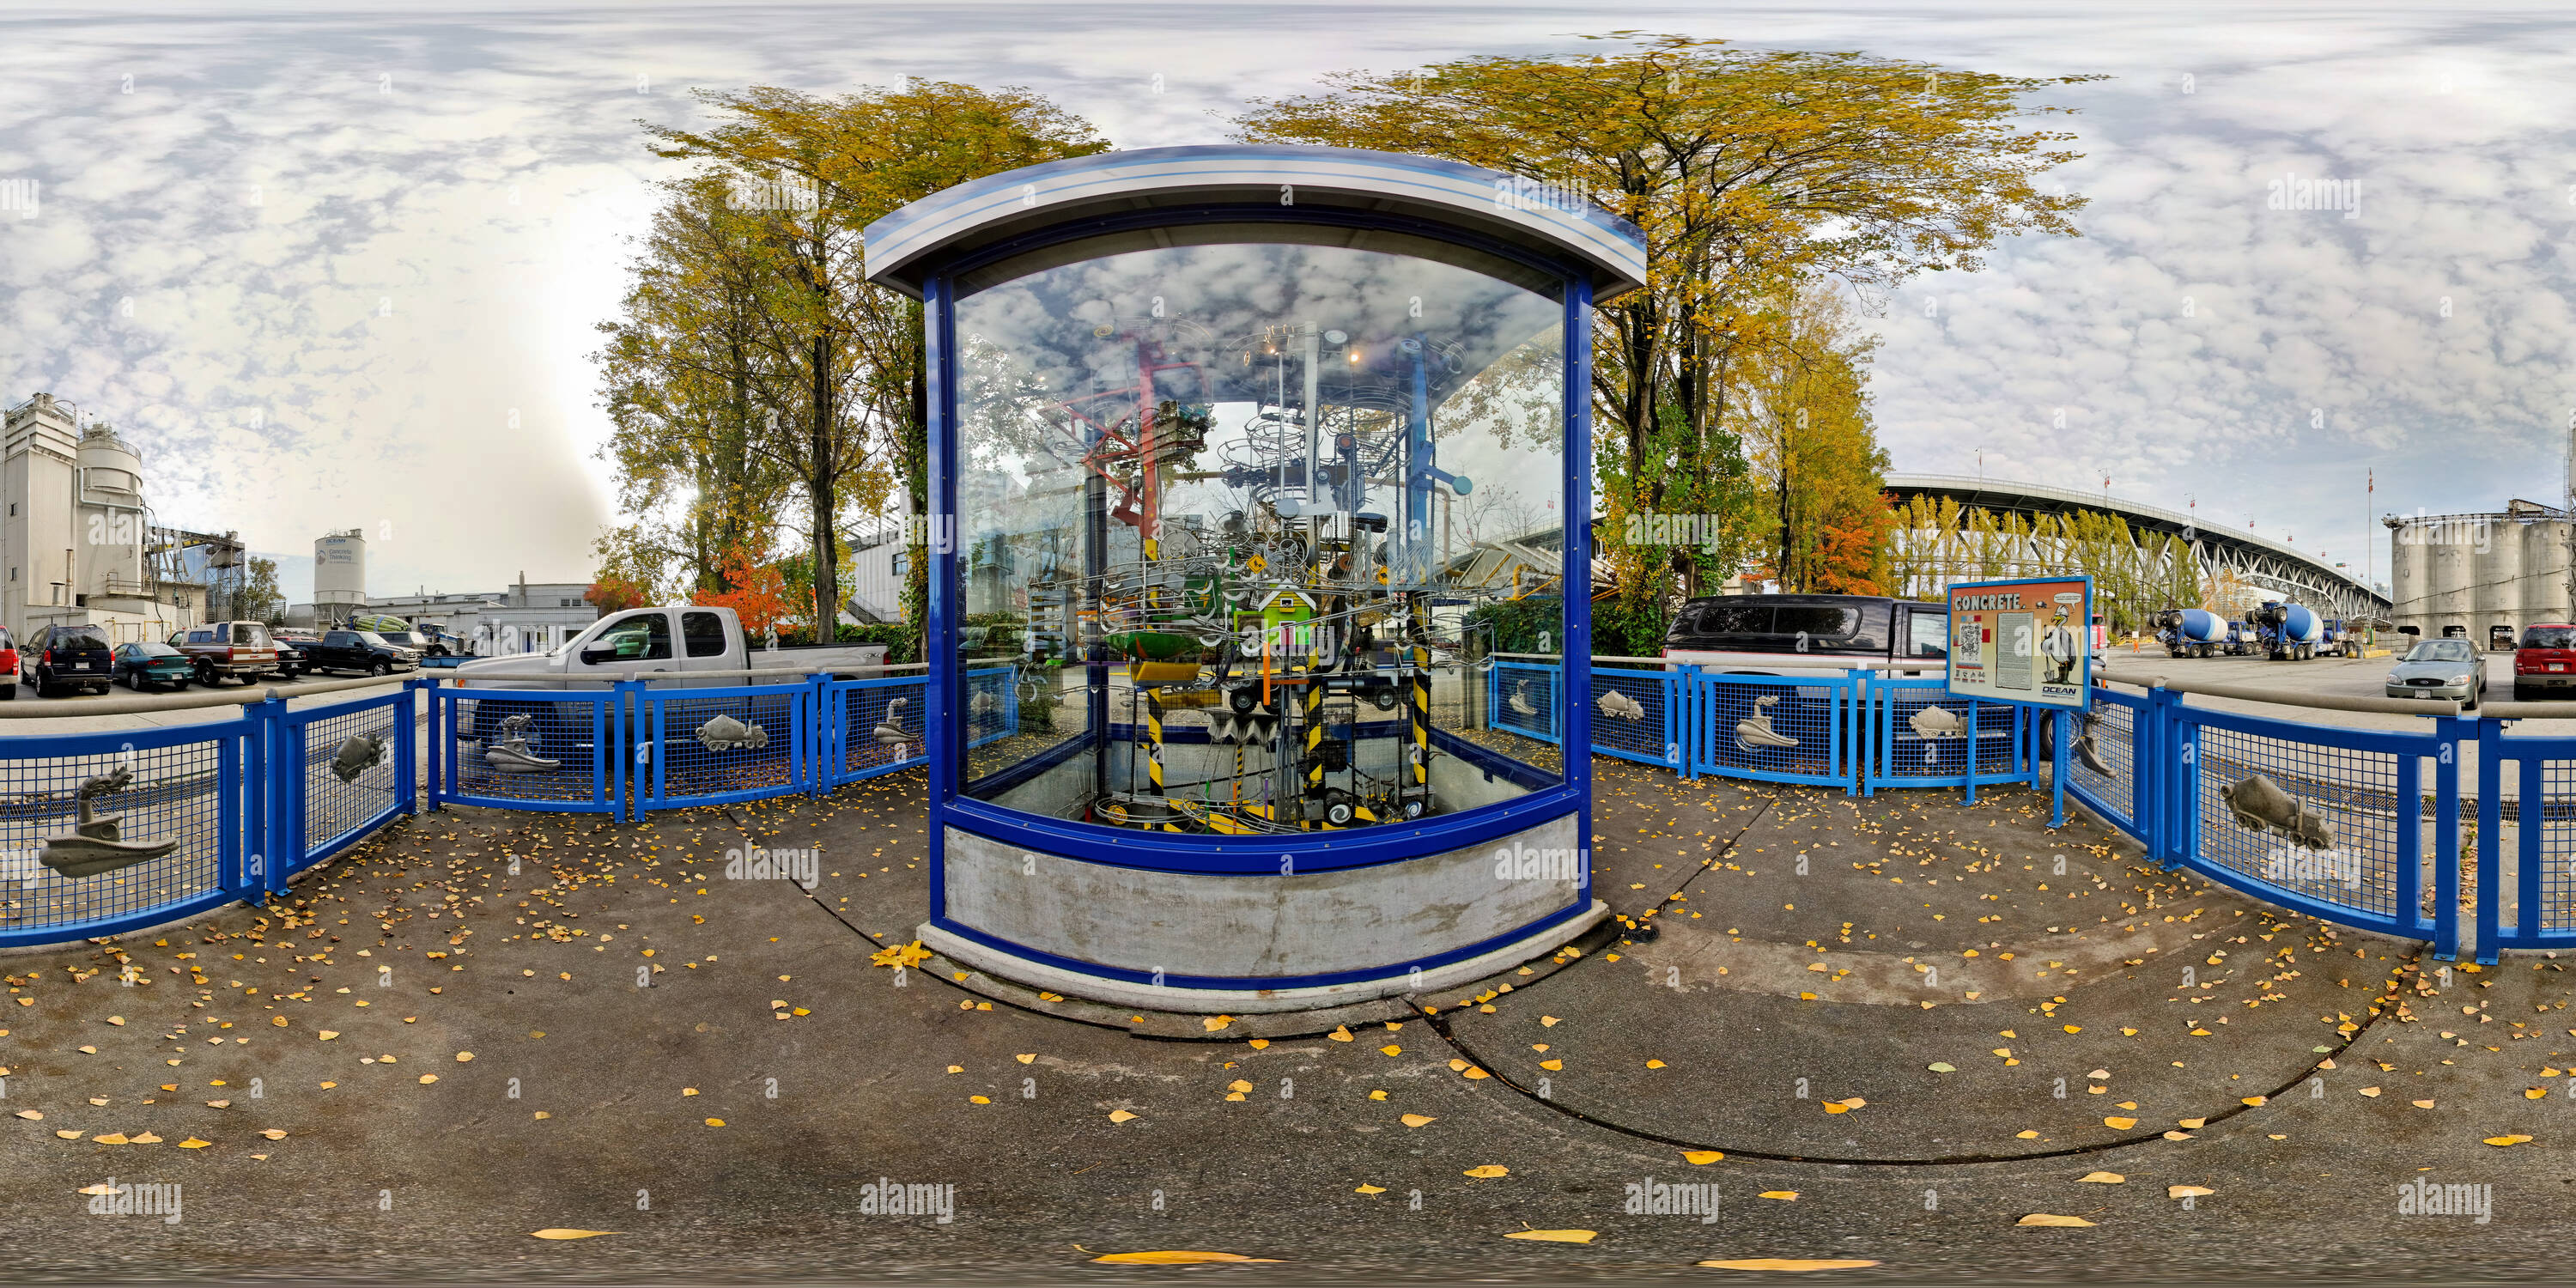 360 degree panoramic view of Kinetic Sculpture, Granville Island, Vancouver